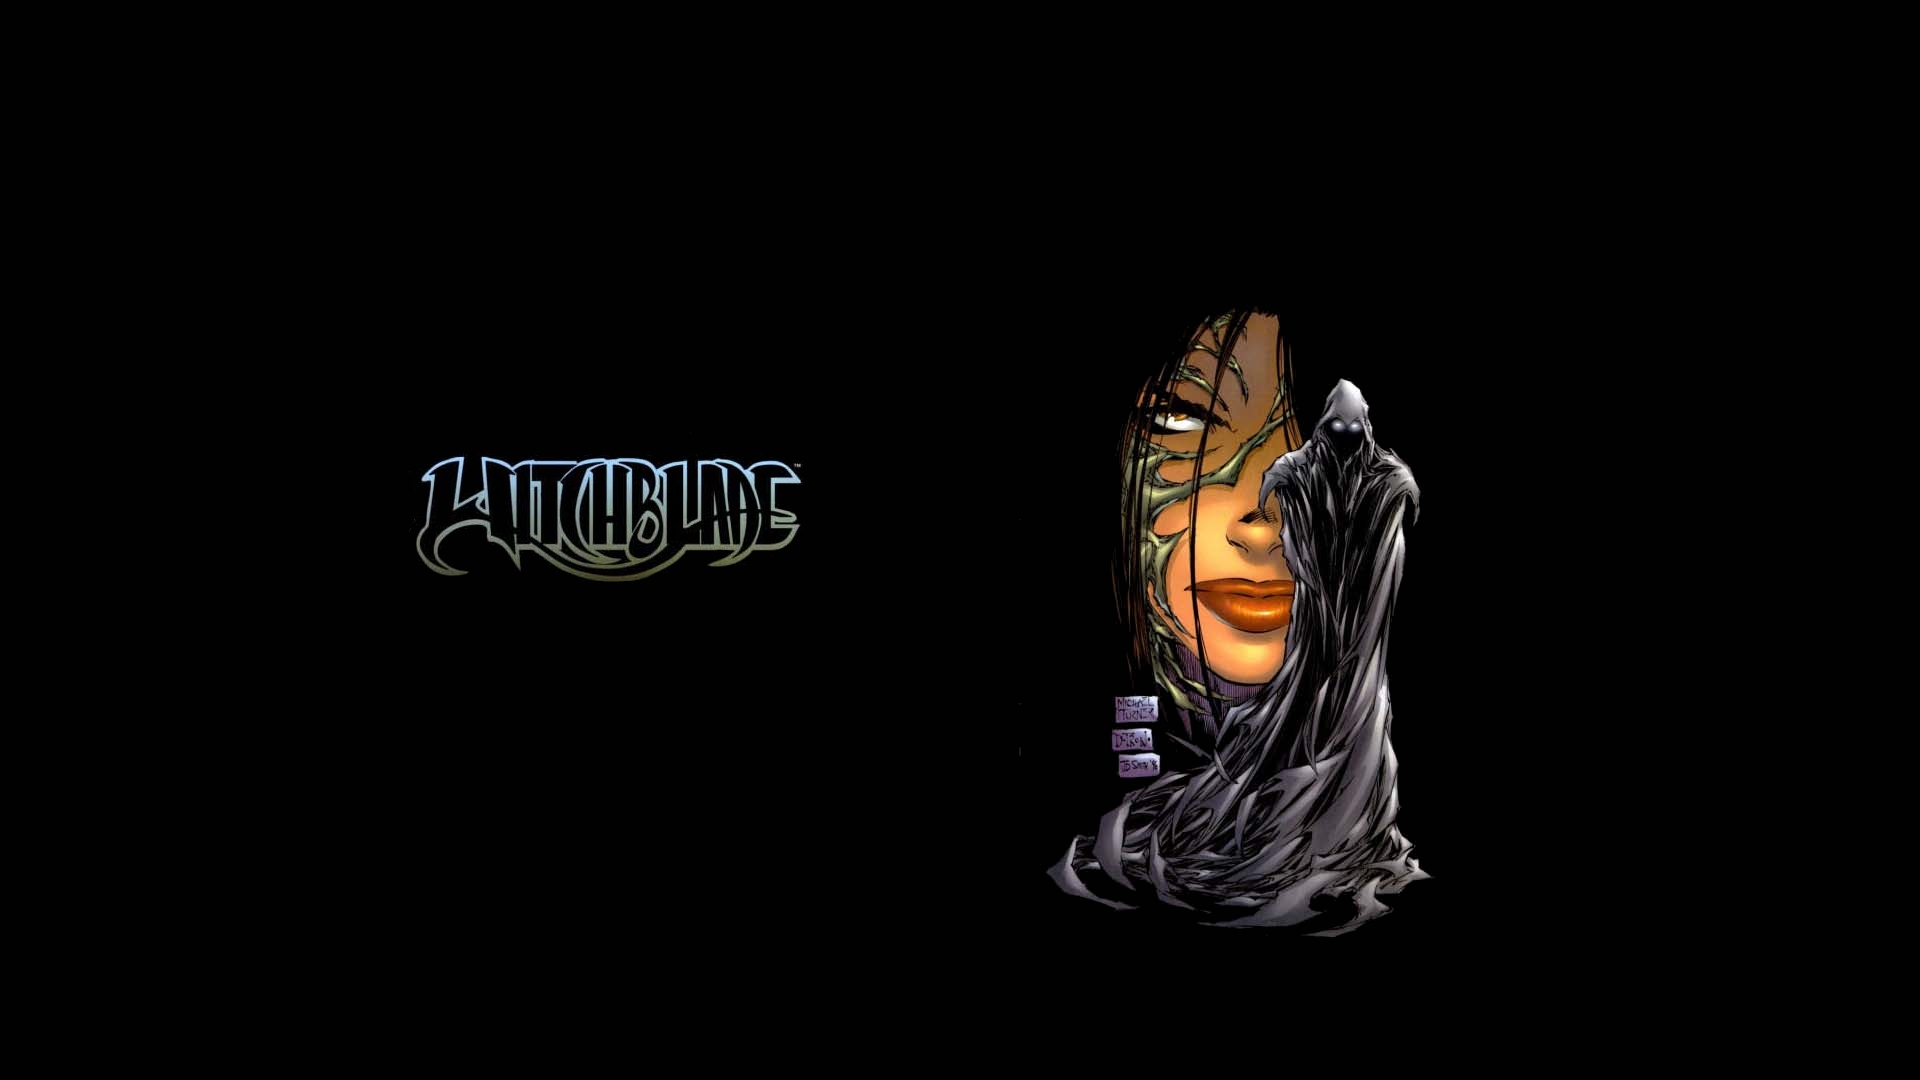  Witchblade Windows Backgrounds